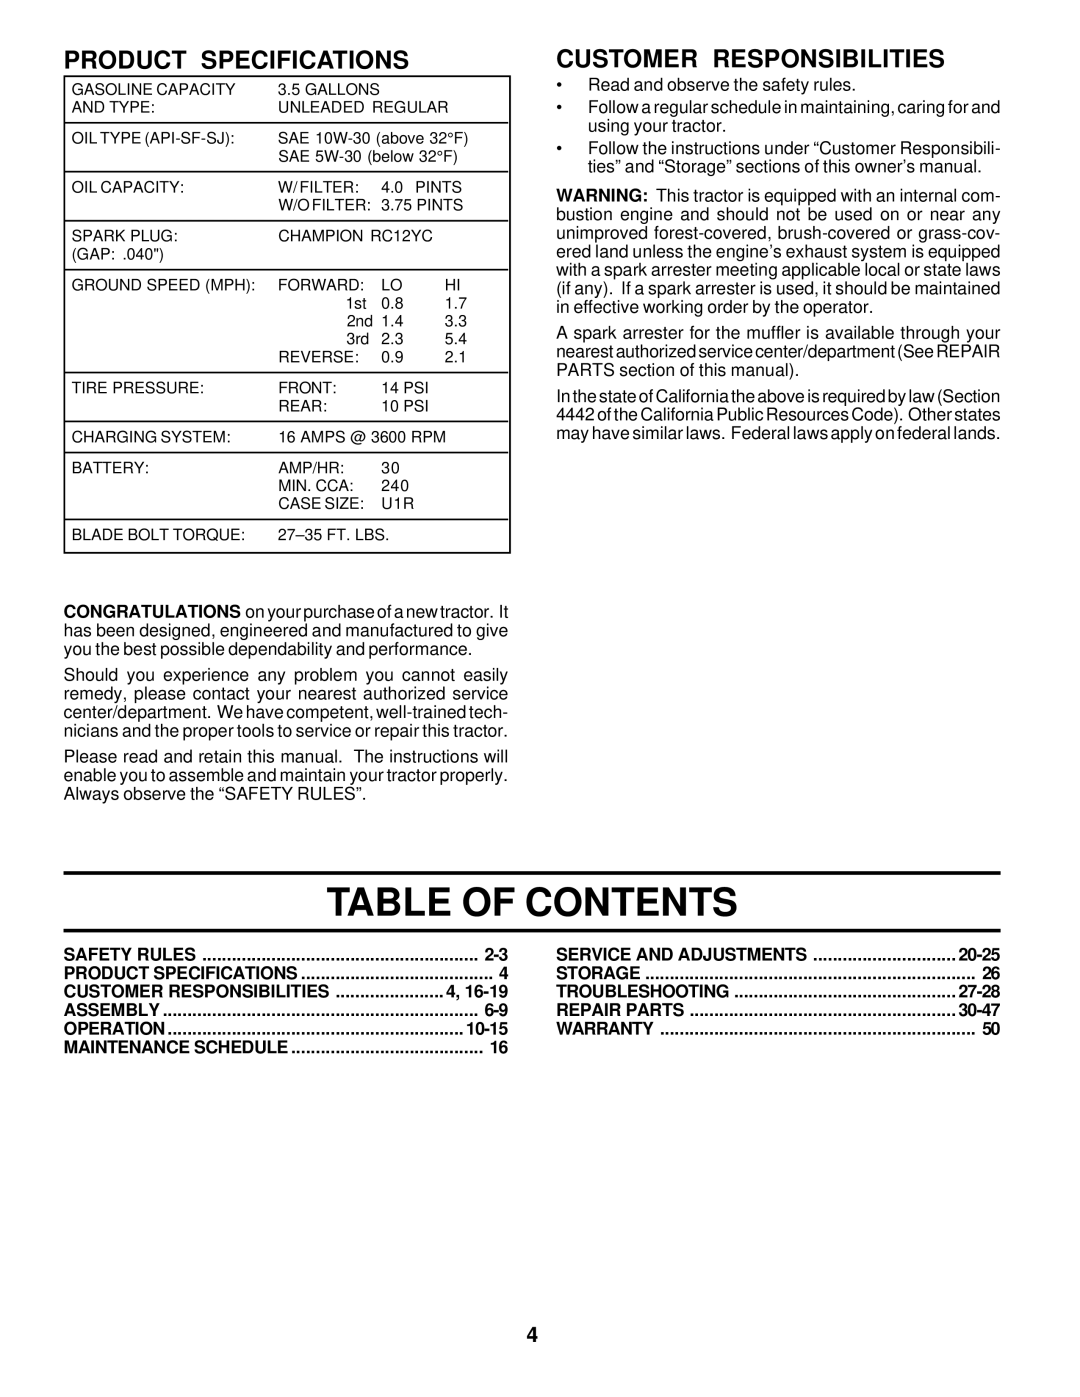 Poulan 178500 owner manual Table of Contents 